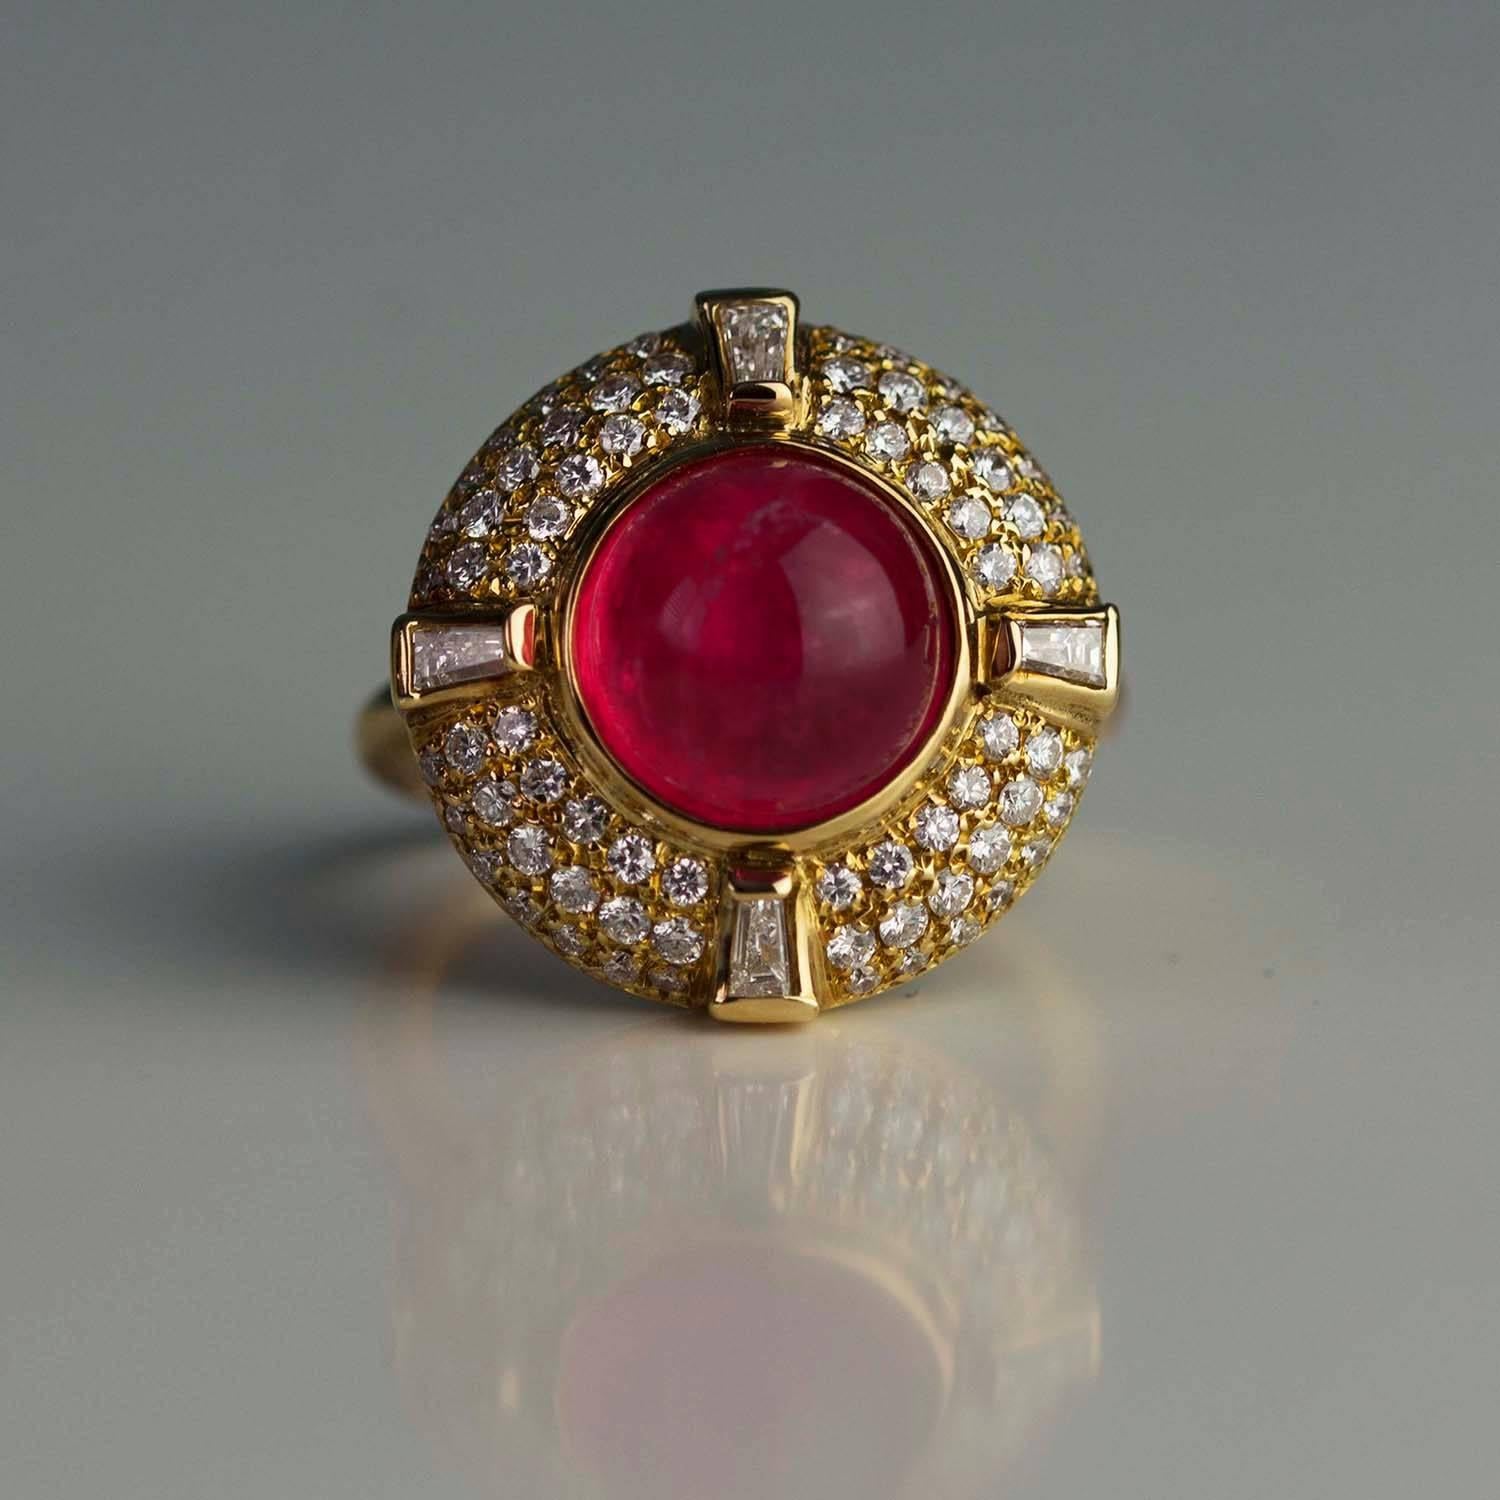 Gorgeous 18k ring with a cabochon pink tourmaline weighing approximately 5.00 carats and collection color/clarity diamonds weighing approximately 1.25 carats.  Complimentary expert ring sizing included.